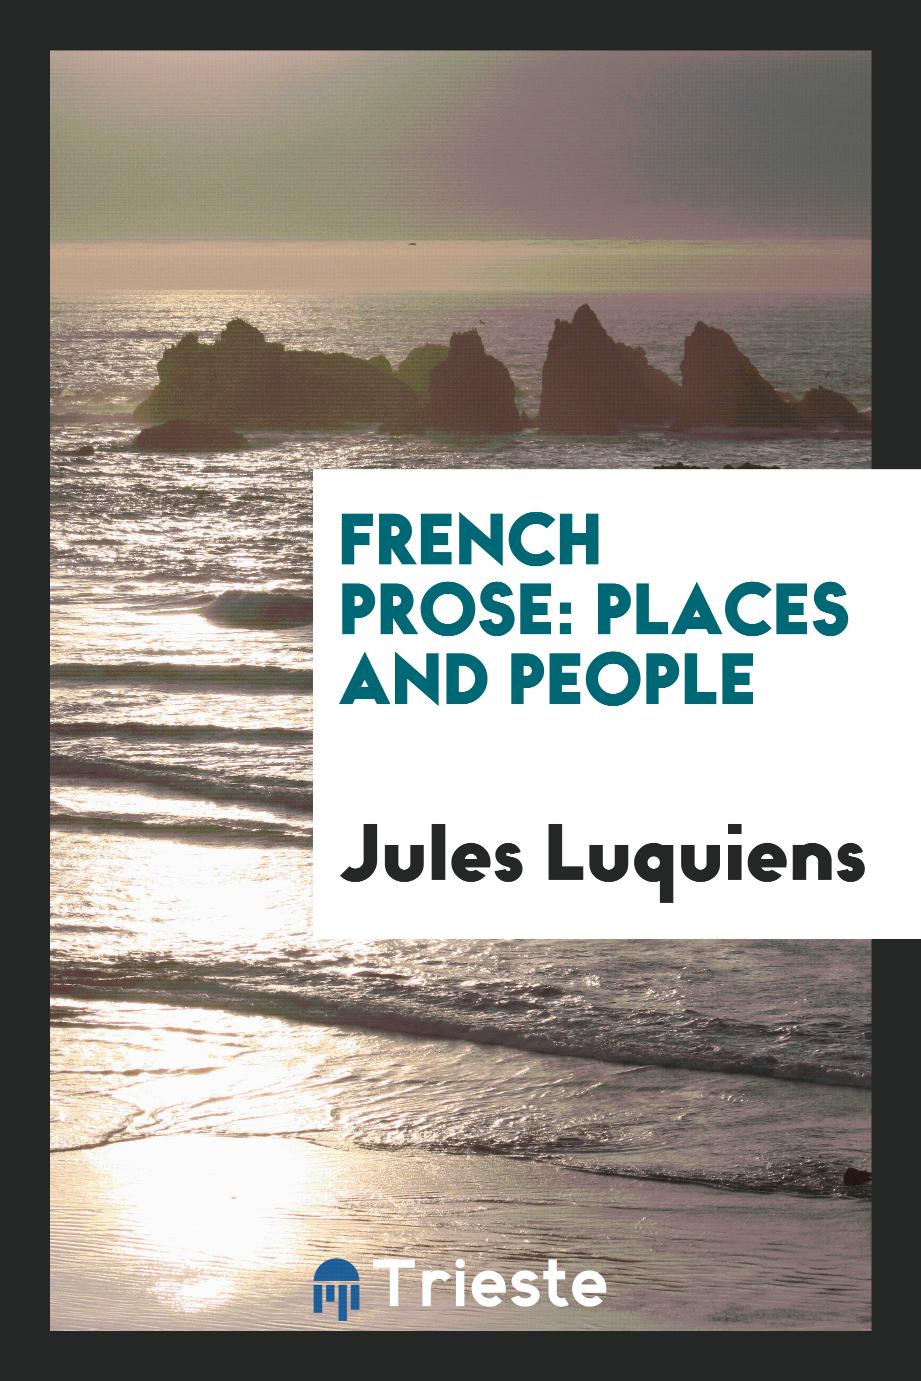 French prose: places and people